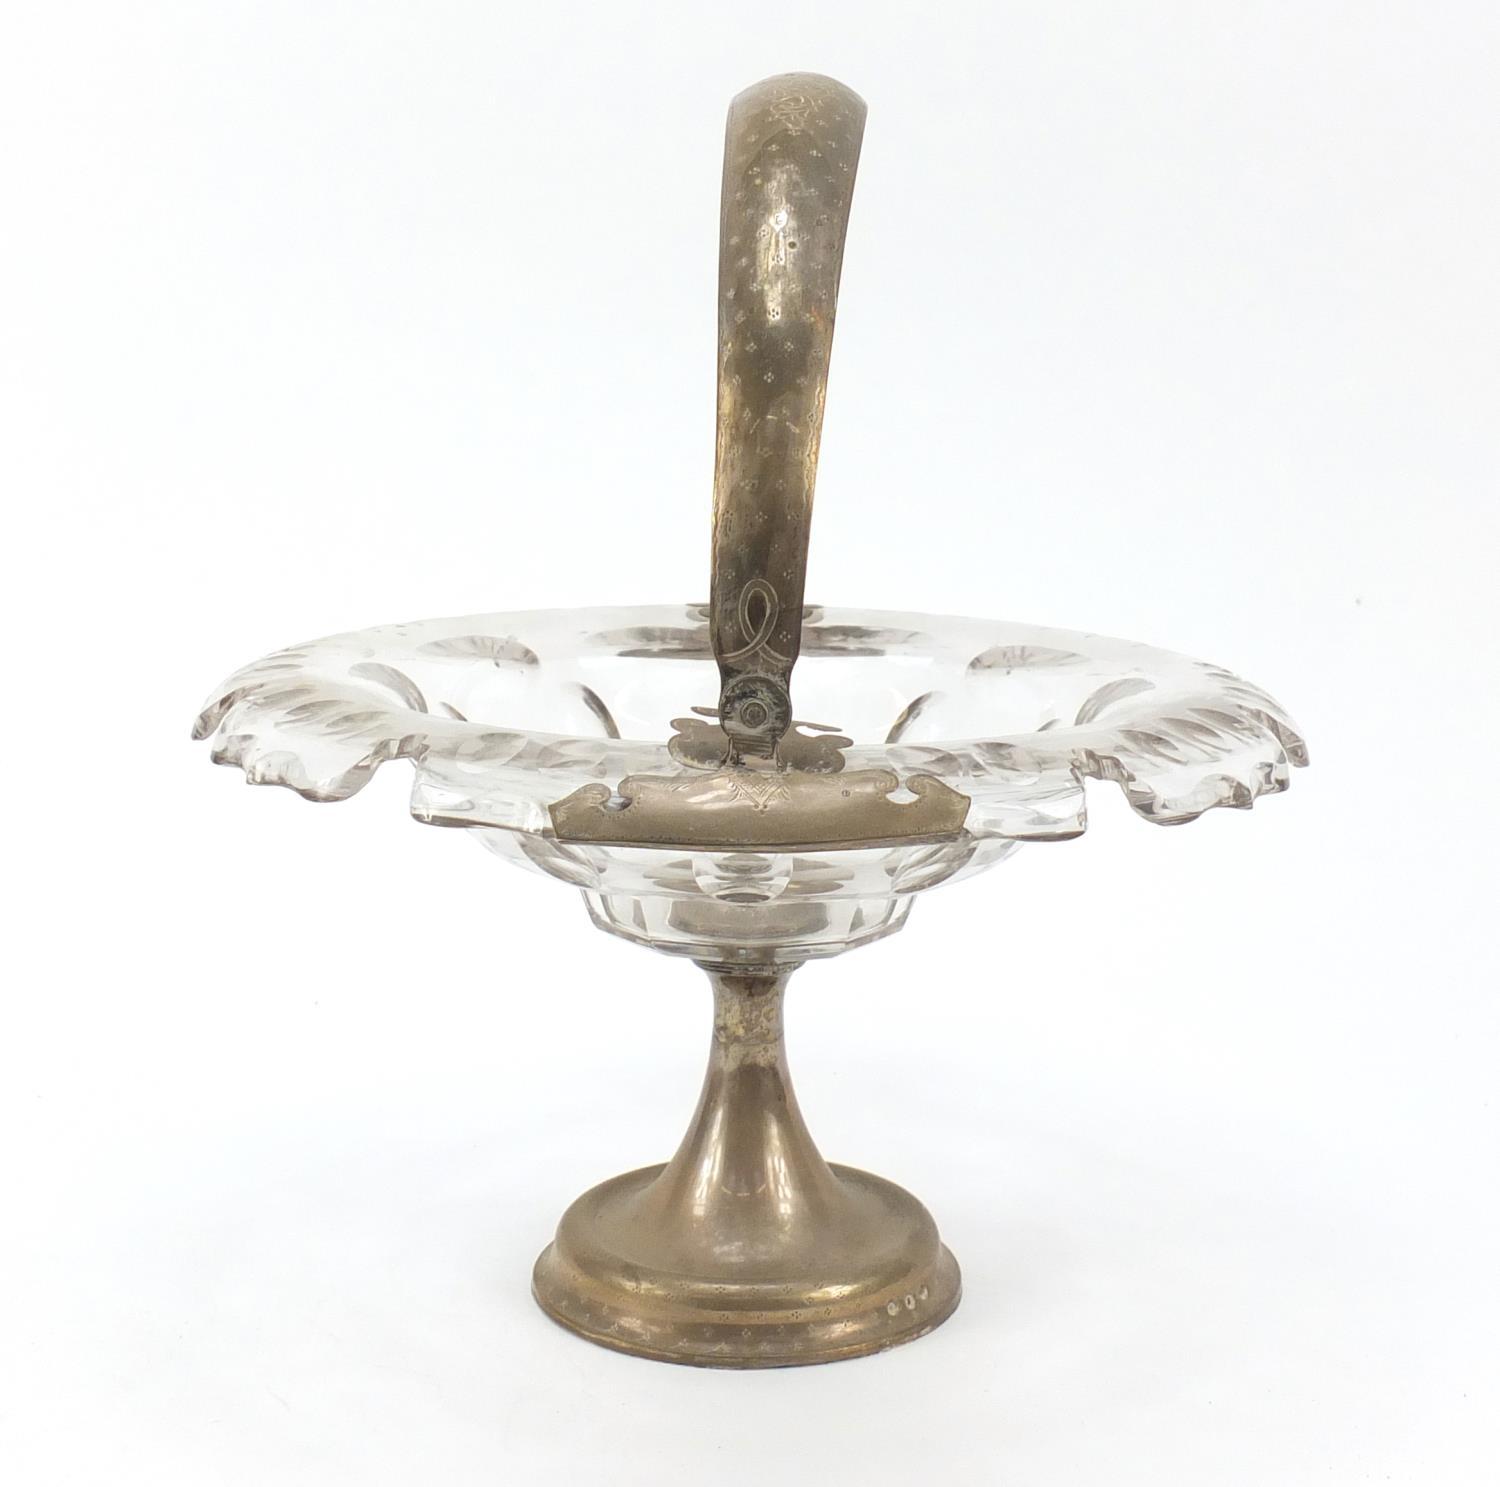 19th century French cut glass baskey with silver swing handle and pedestal, 28cm in diameter : For - Image 3 of 8